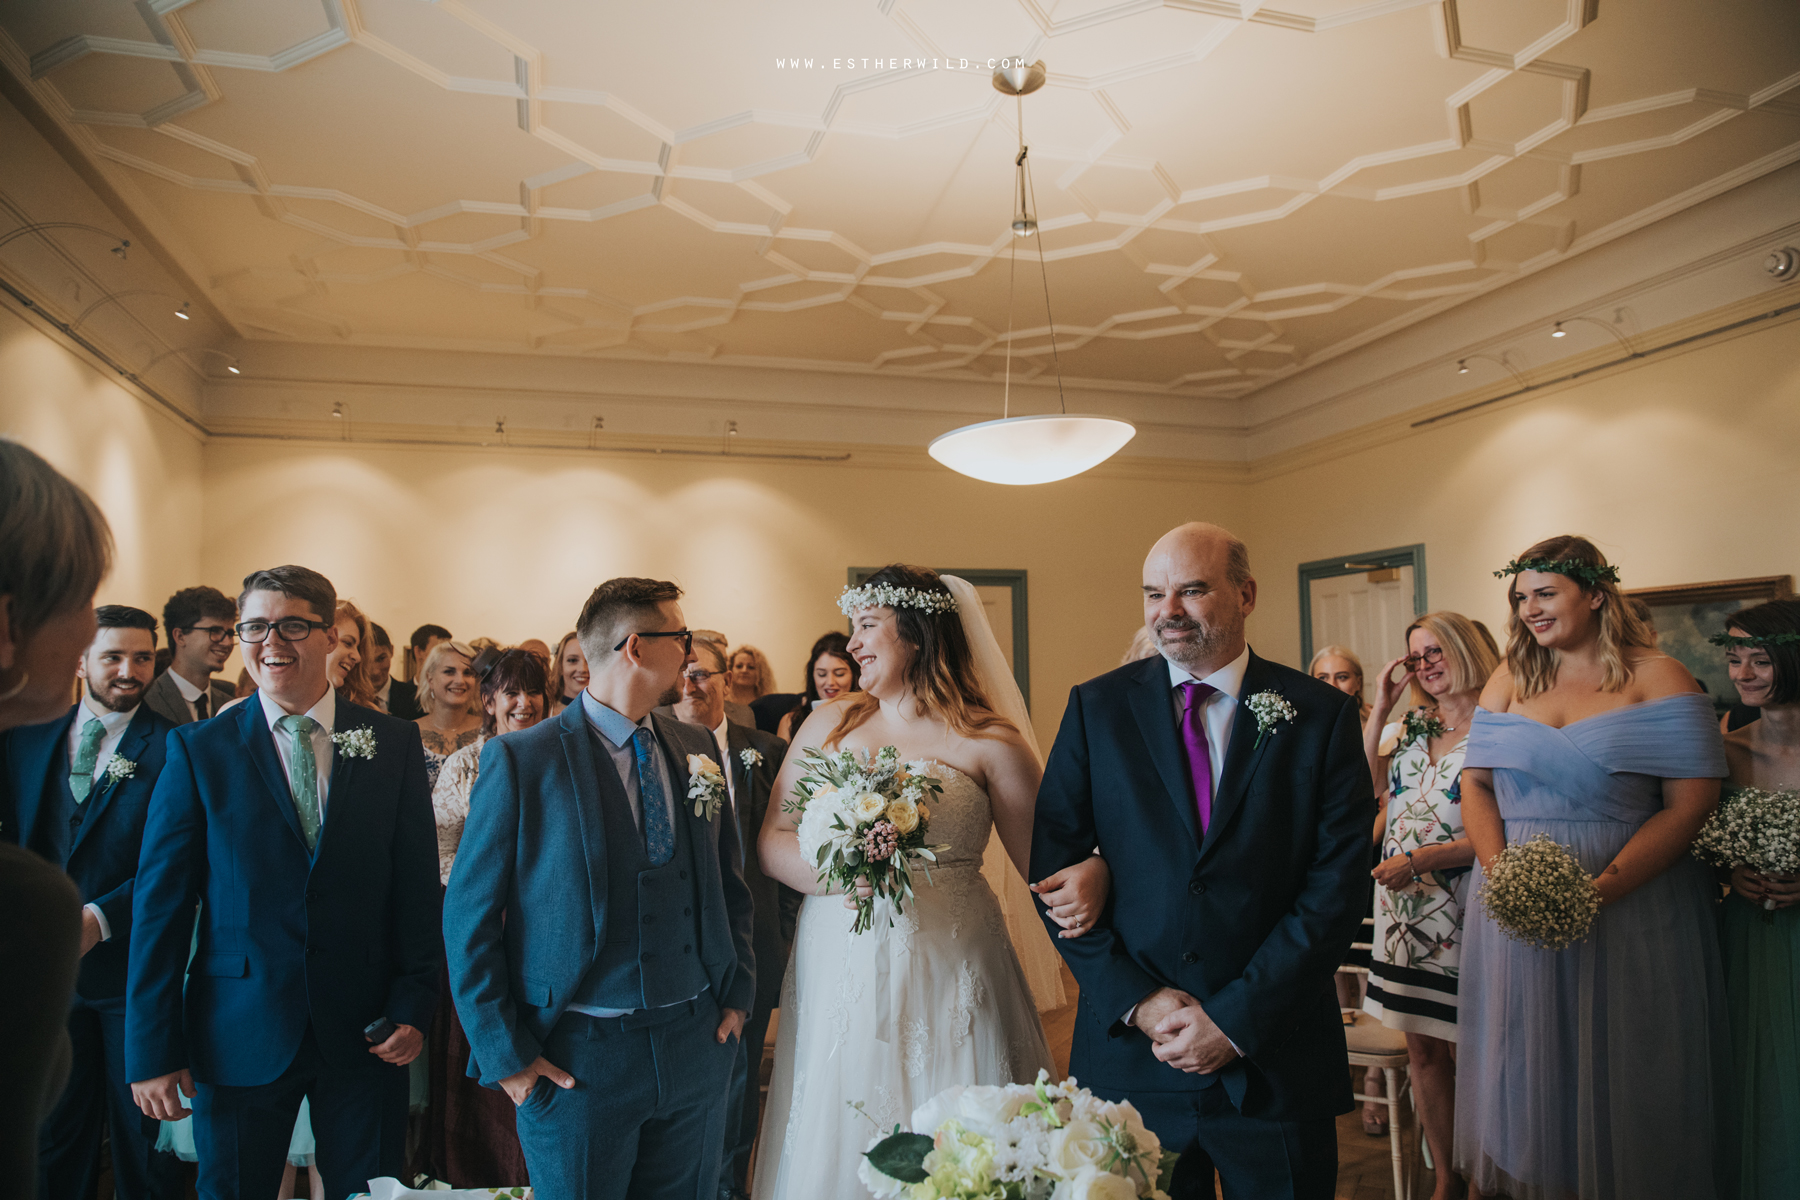 Norwich_Castle_Arcade_Grosvenor_Chip_Birdcage_Cathedral_Cloisters_Refectory_Wedding_Photography_Esther_Wild_Photographer_Norfolk_Kings_Lynn_3R8A0896.jpg